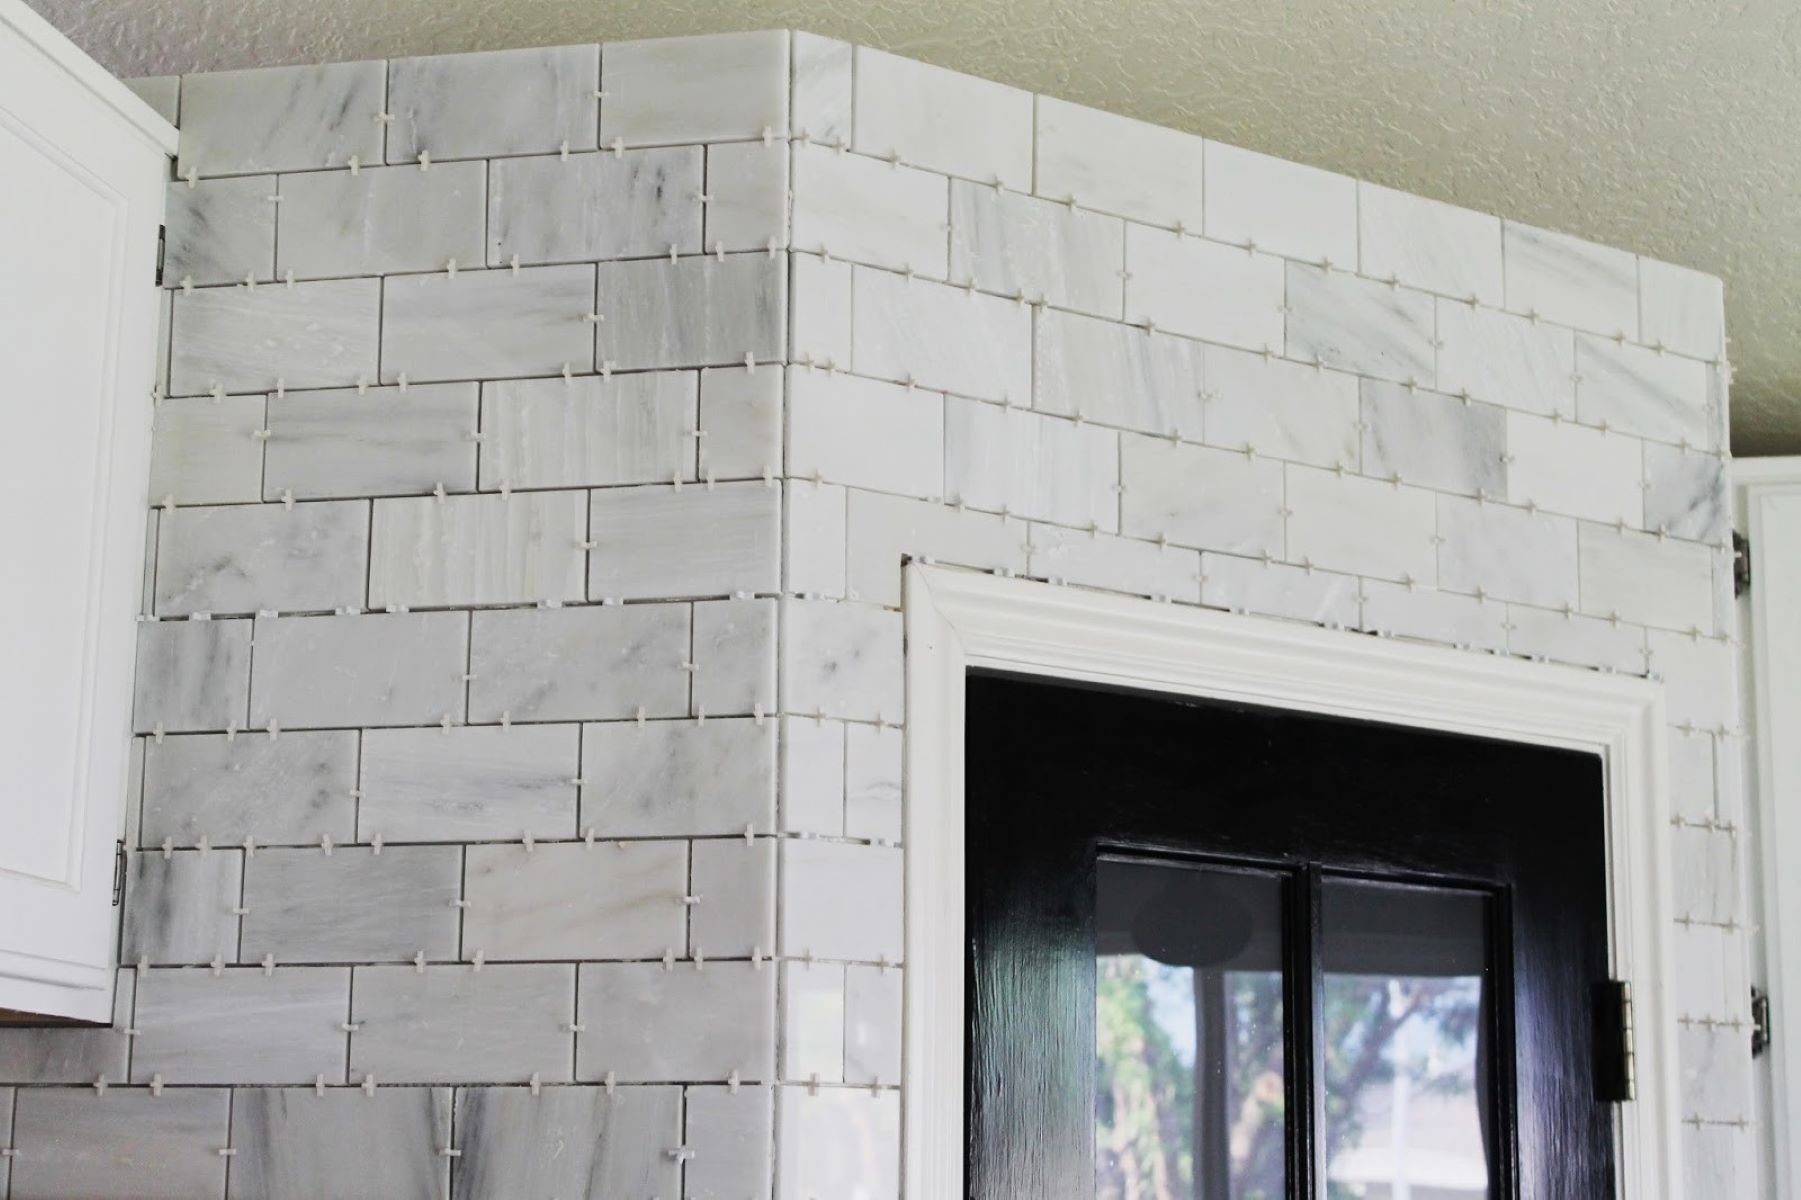 How To Do Grout For Backsplash